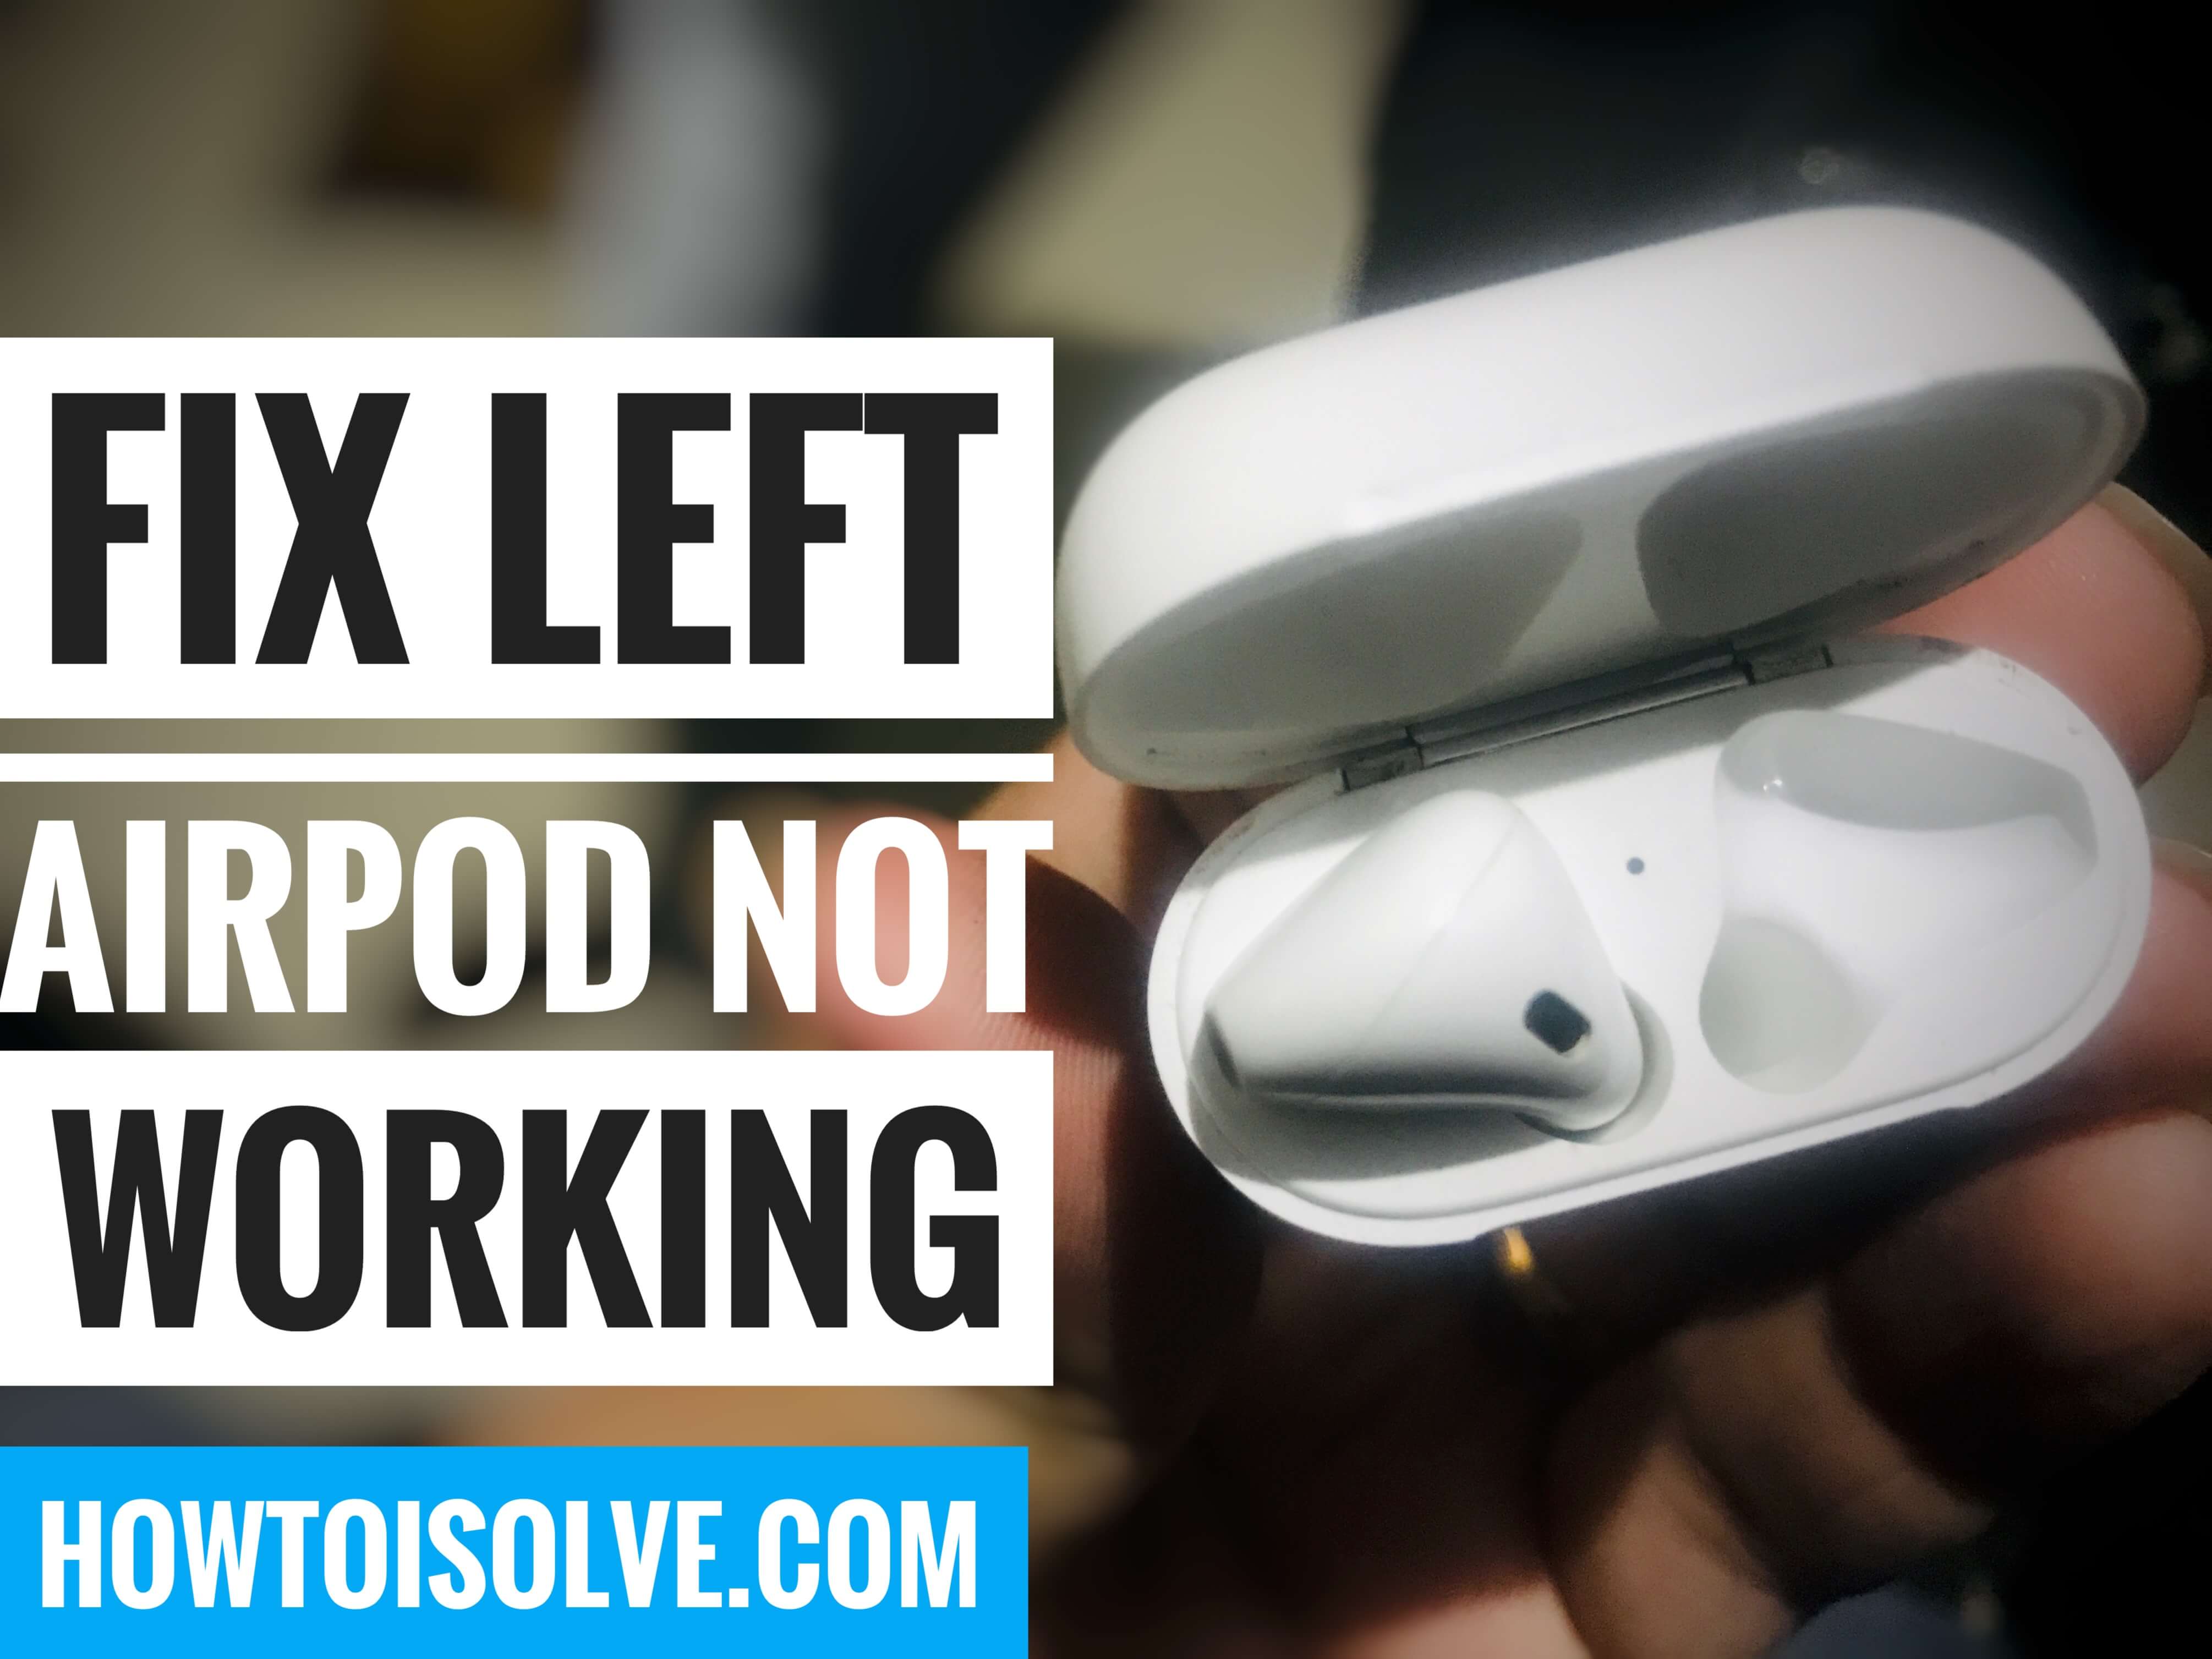 13 Fixes Right/Left Airpod Not Working Properly Only